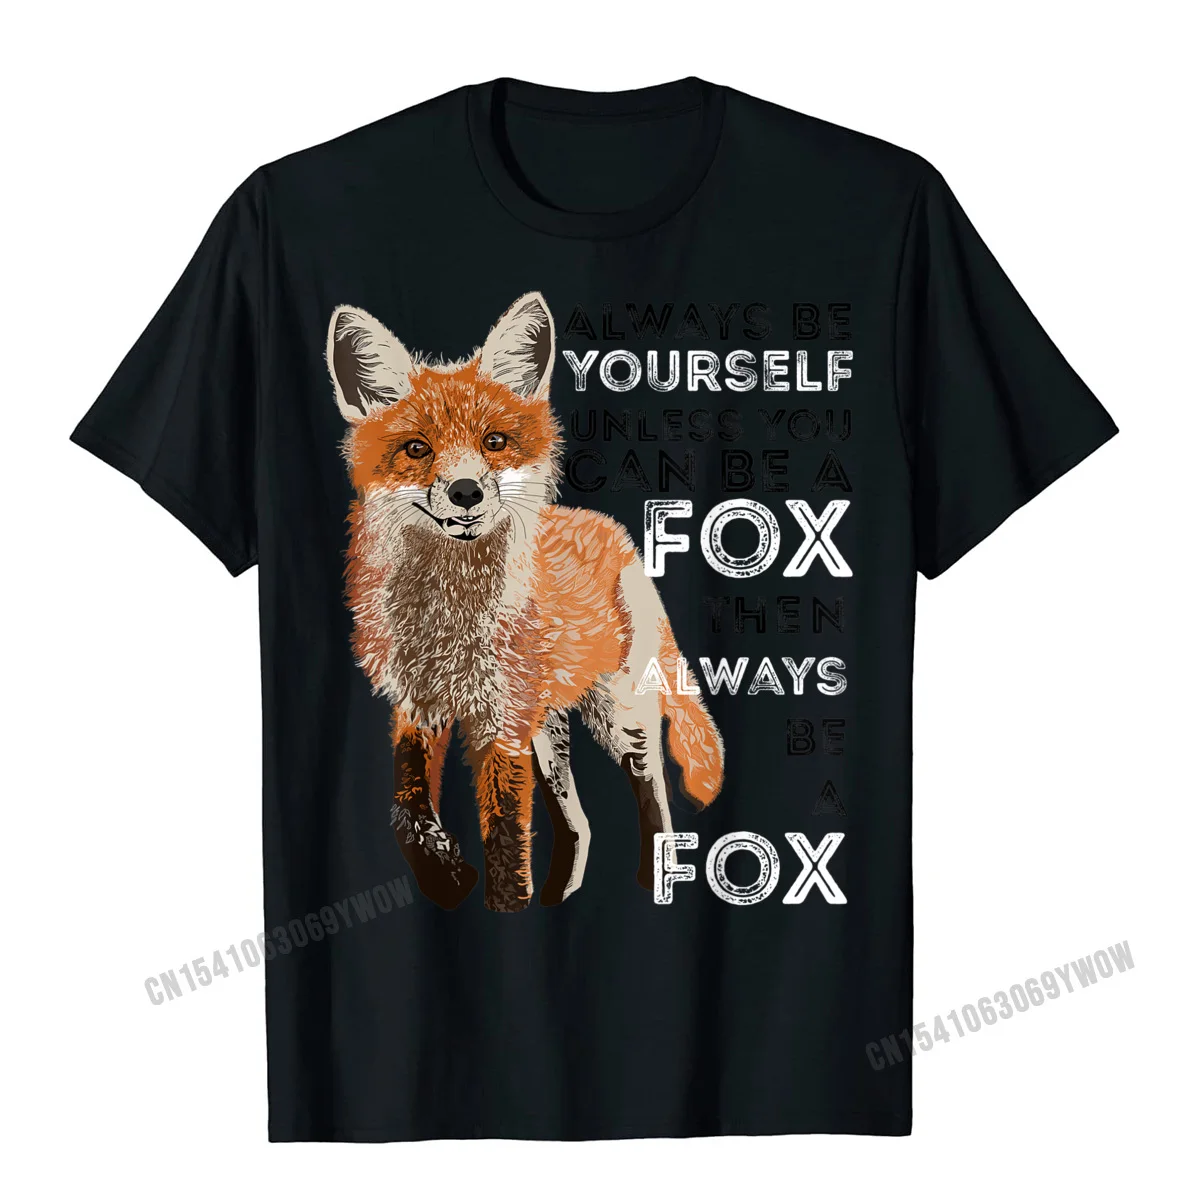 

Always Be Yourself Unless You Can Be A Fox Shirt Funny Gift T-Shirt Funny Casual Top T-Shirts Harajuku Cotton Men T Shirt Casual